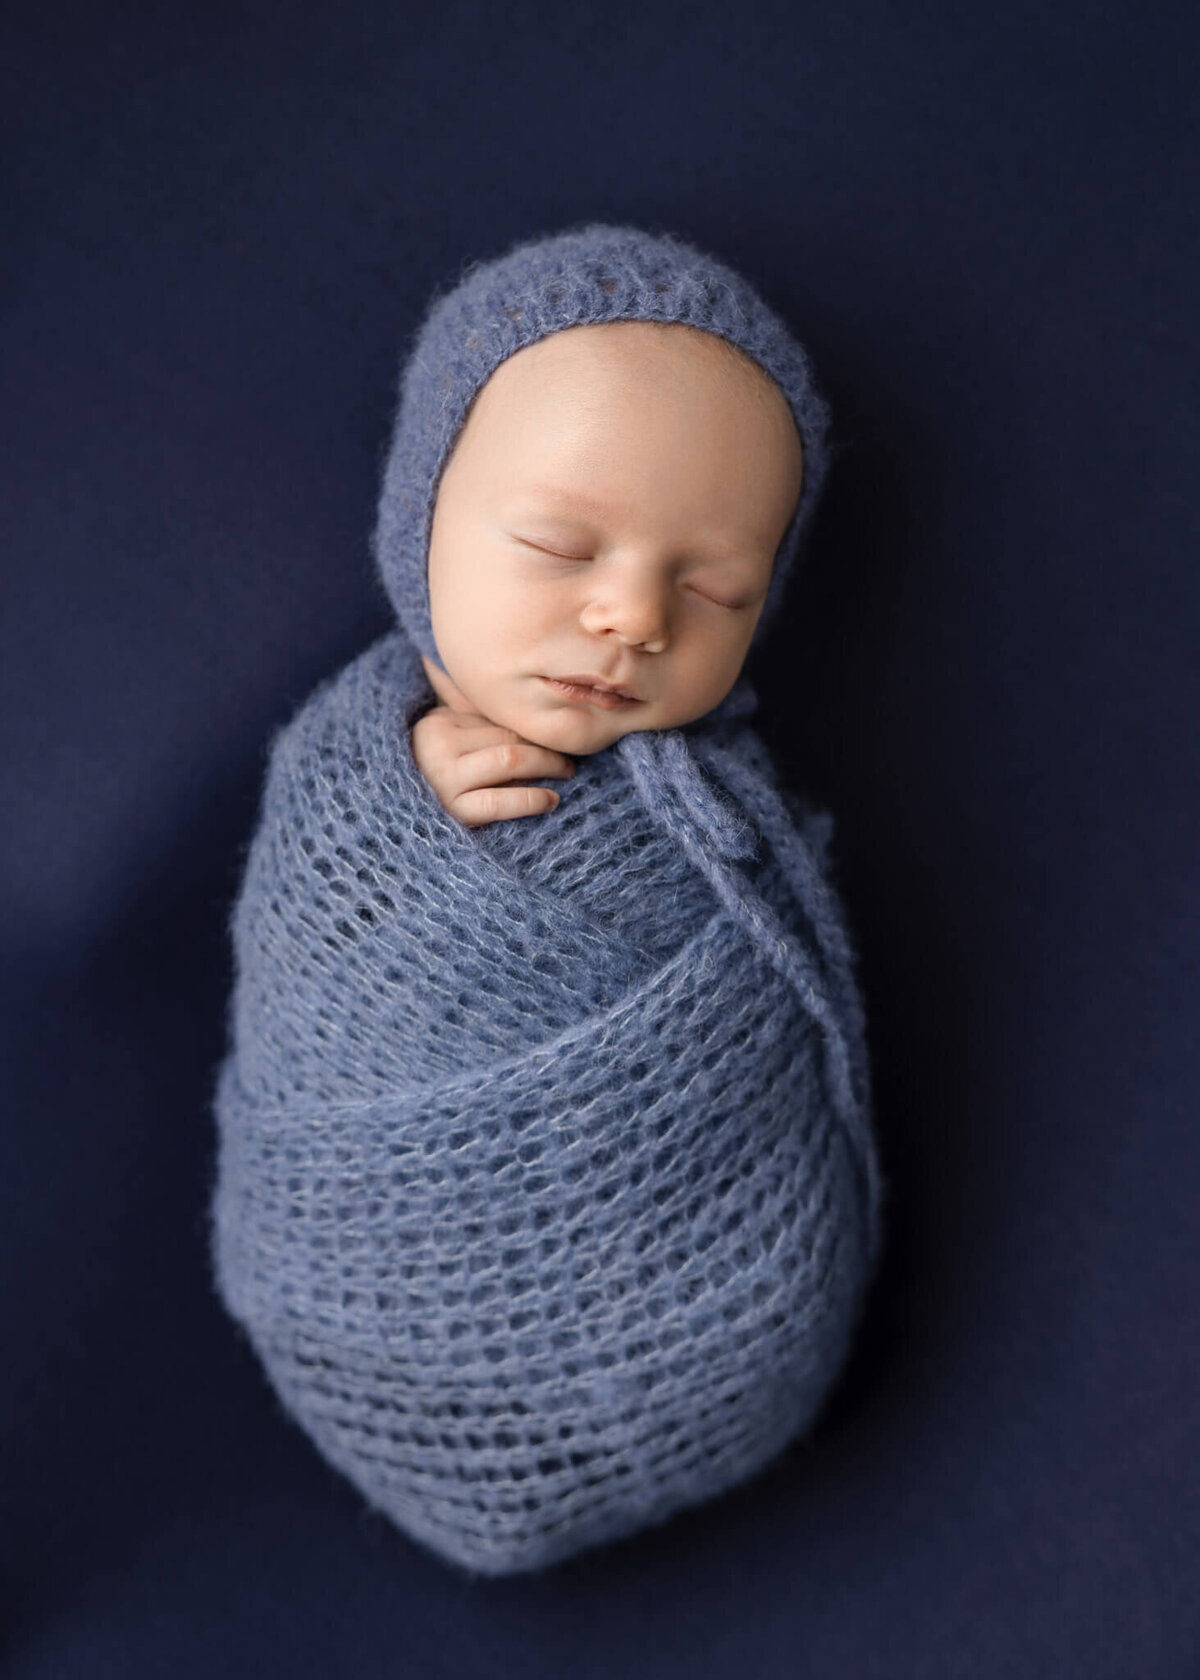 newborn baby wrapped in a blue knitted wrap and bonnet asleep on blue fabric